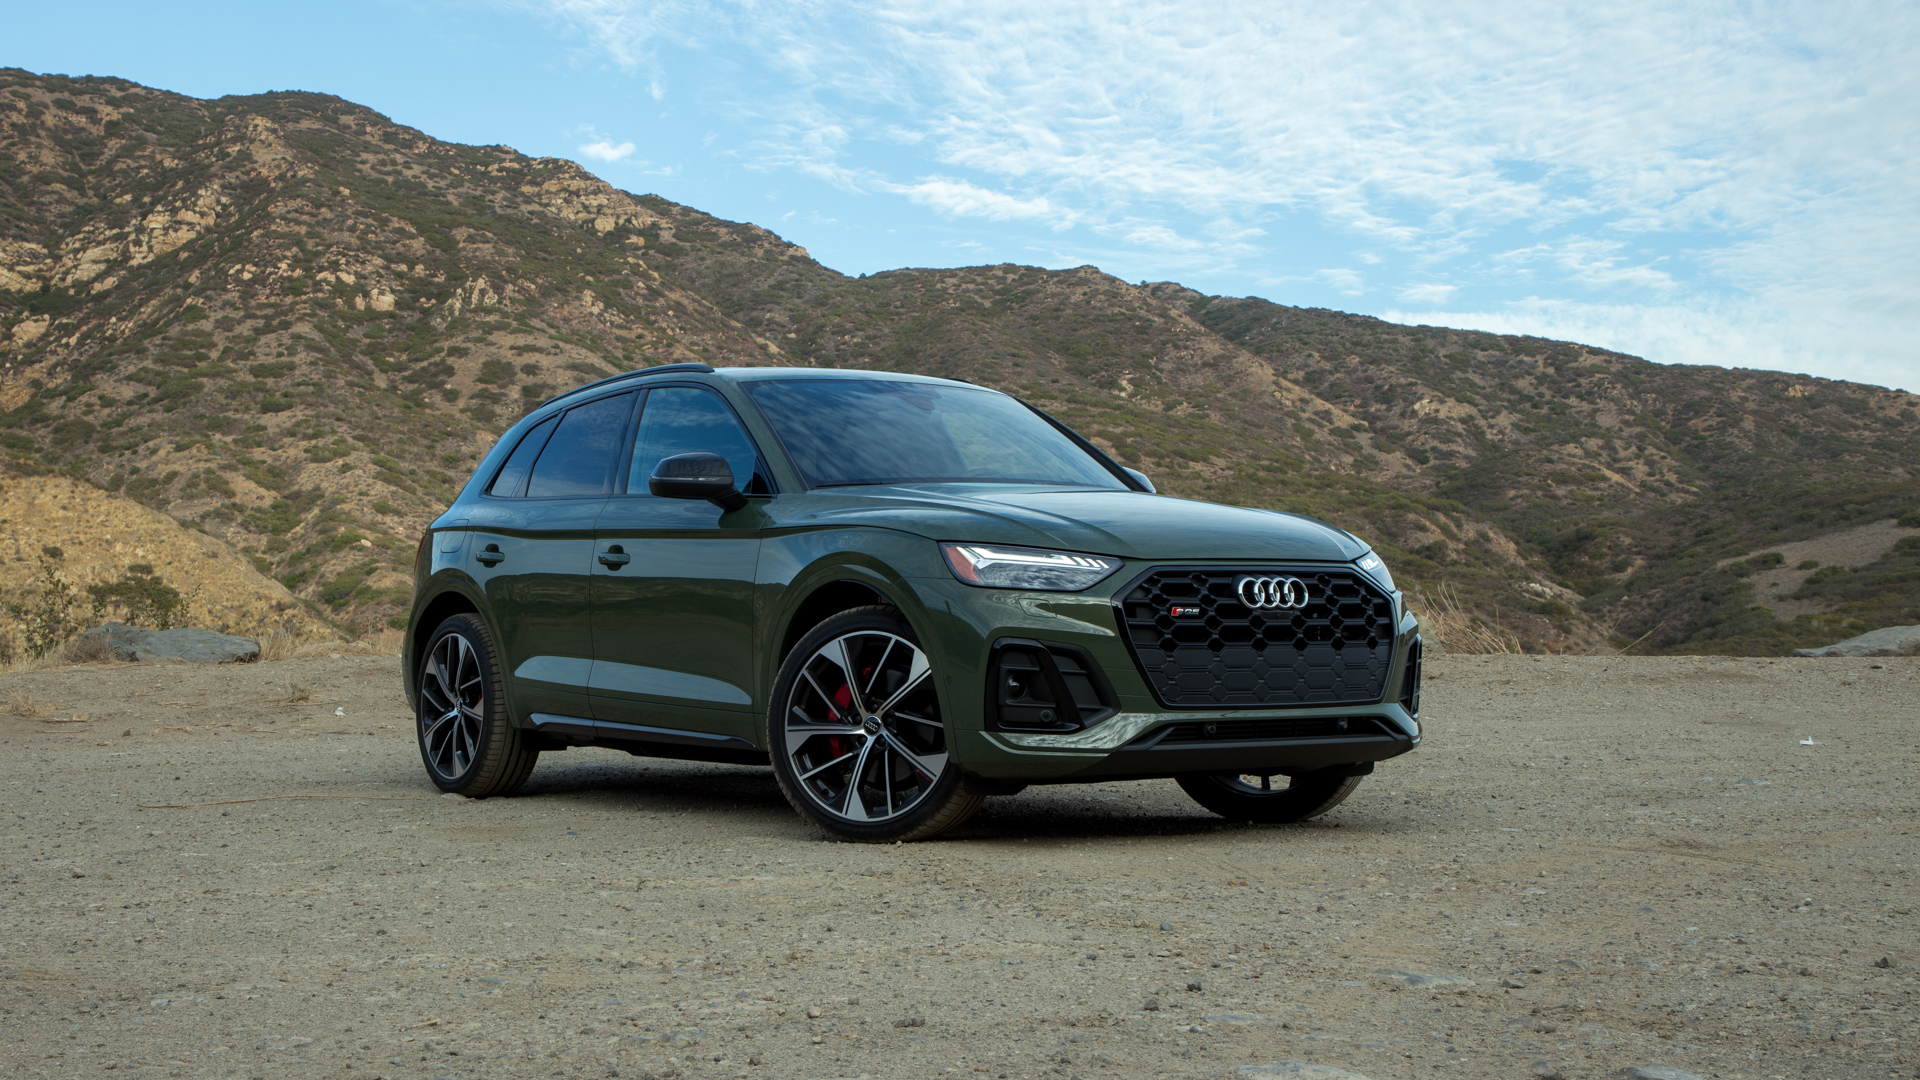 2021 Audi SQ5: 5 Things We Like and 3 Things We Don't